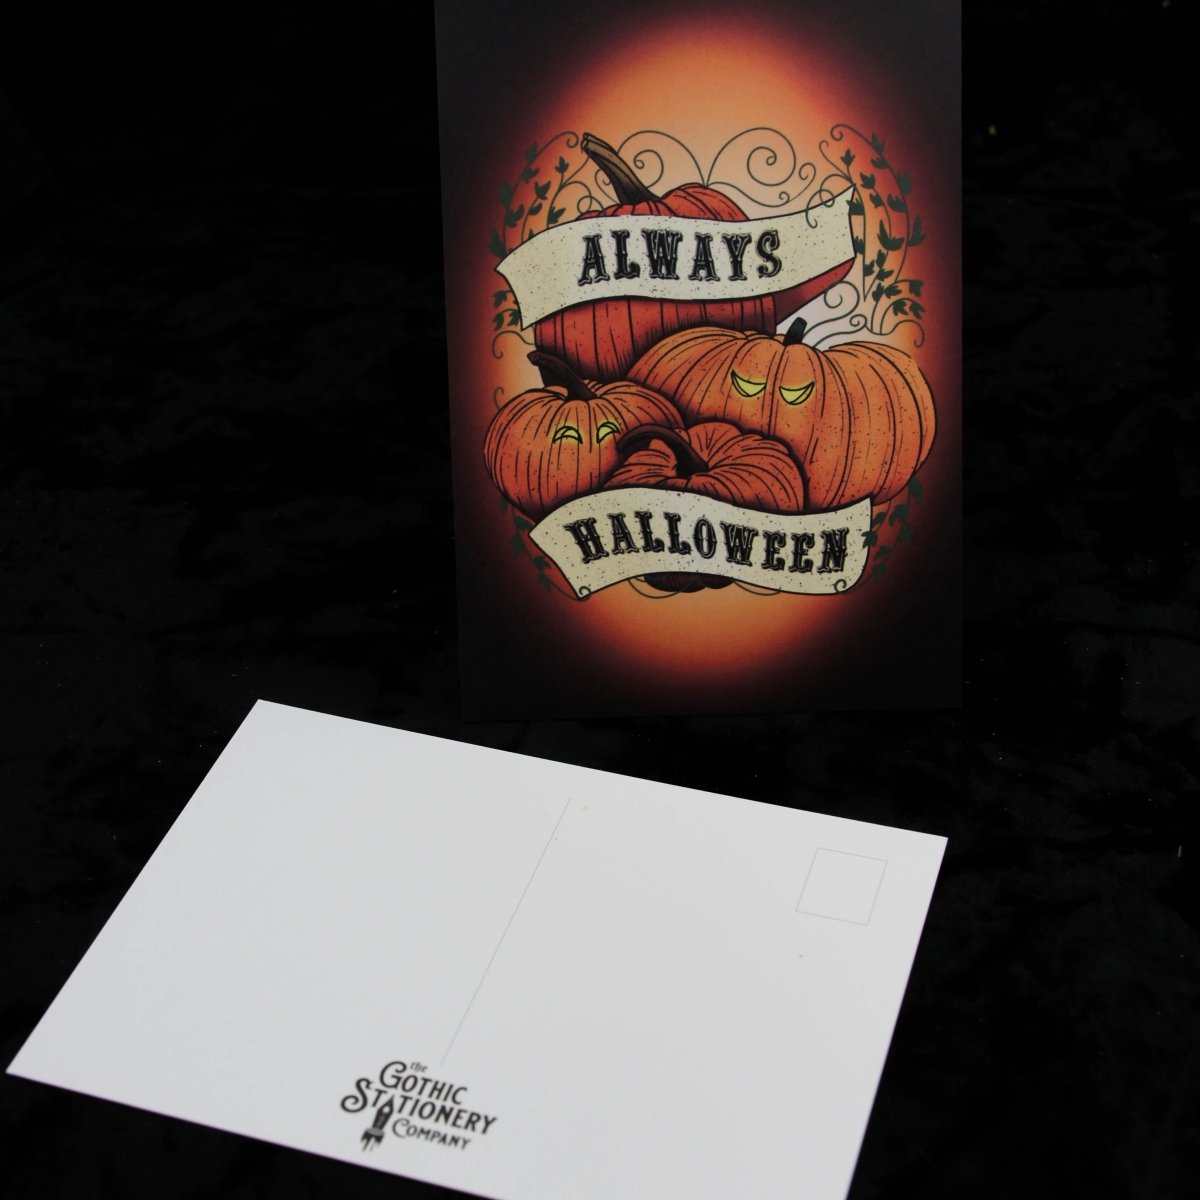 Always Halloween A6 Post card and an image of the back of the card